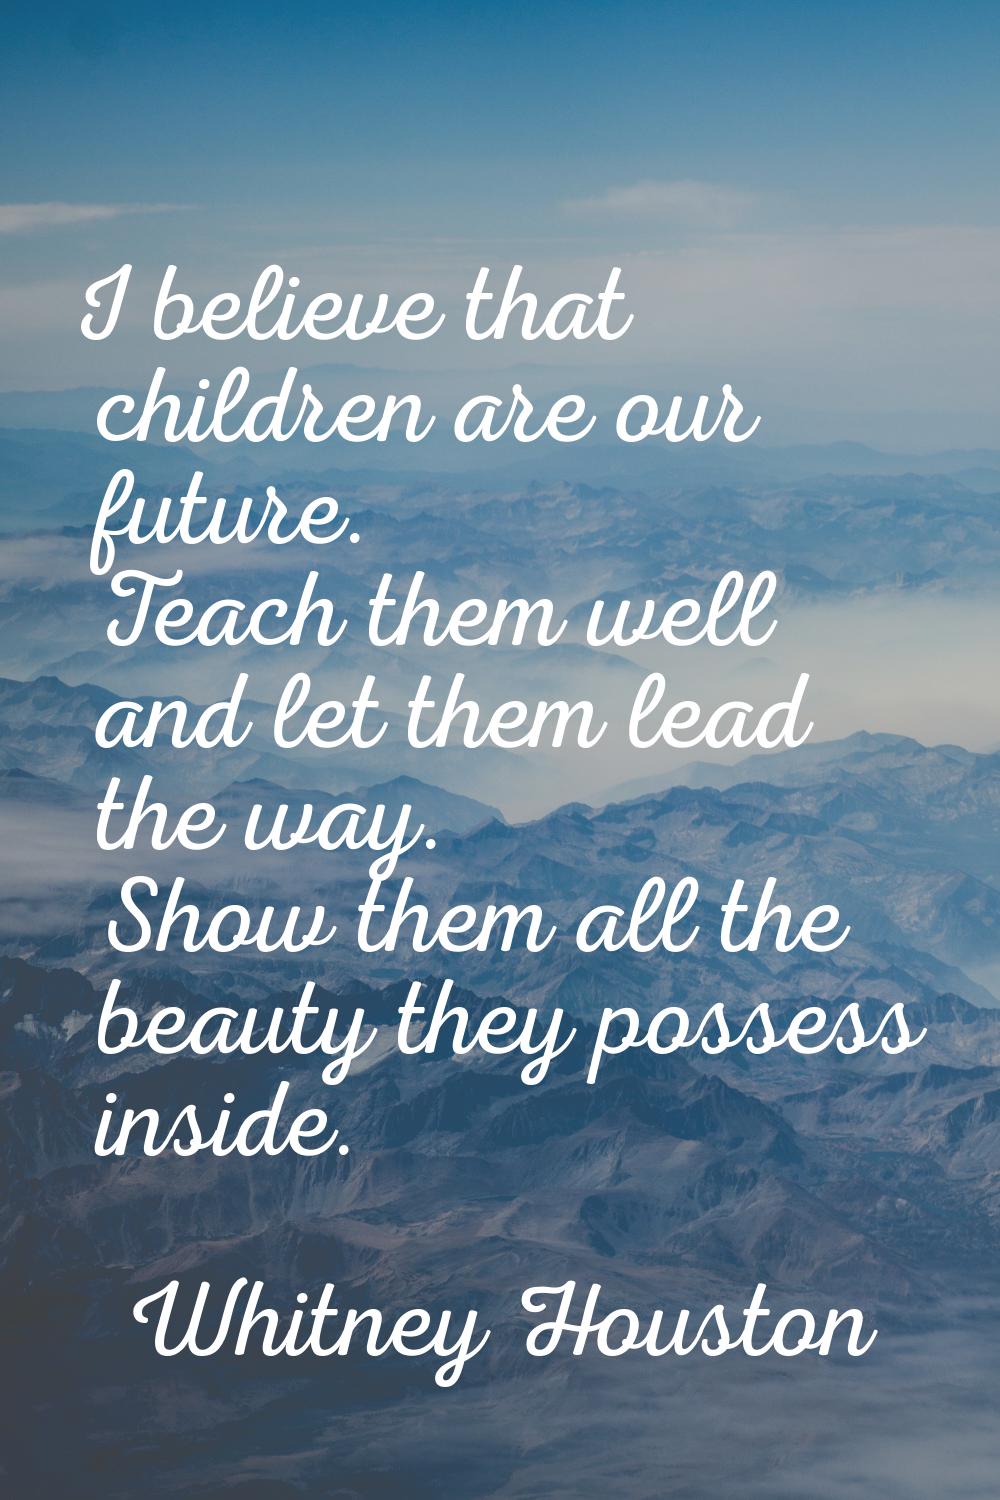 I believe that children are our future. Teach them well and let them lead the way. Show them all th